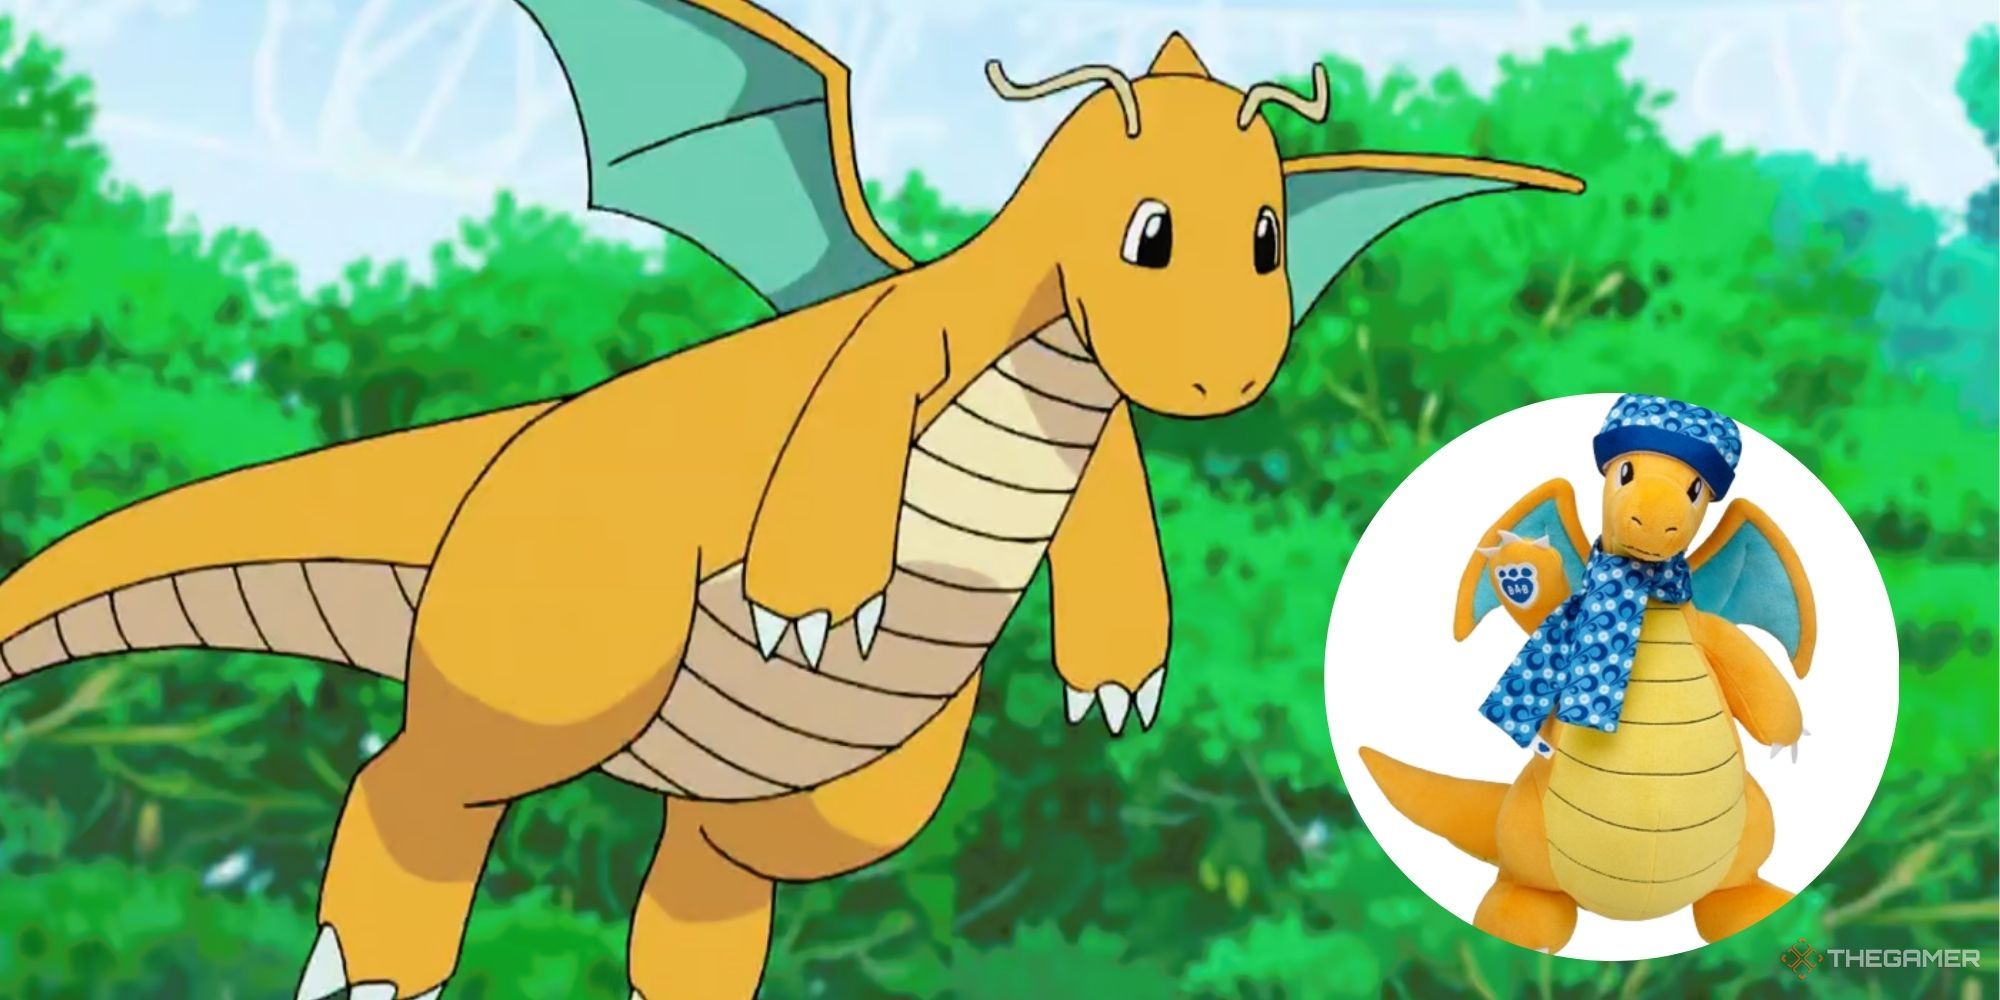 dragonite in the pokemon anime looking at a build-a-bear dragonite